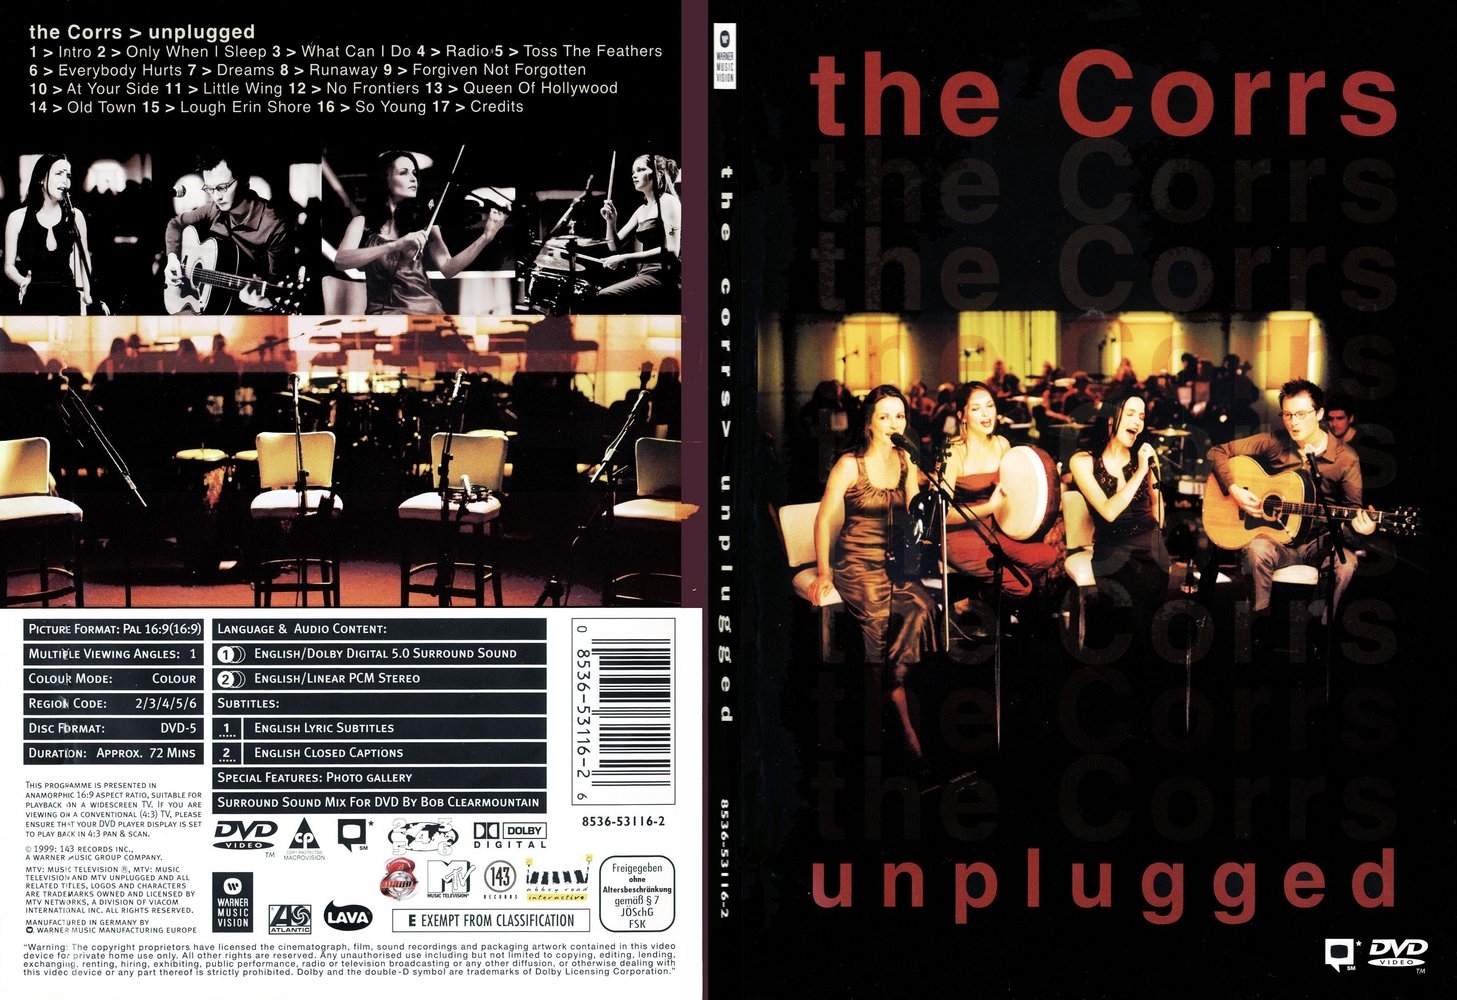 Jaquette DVD The Corrs Unplugged - SLIM